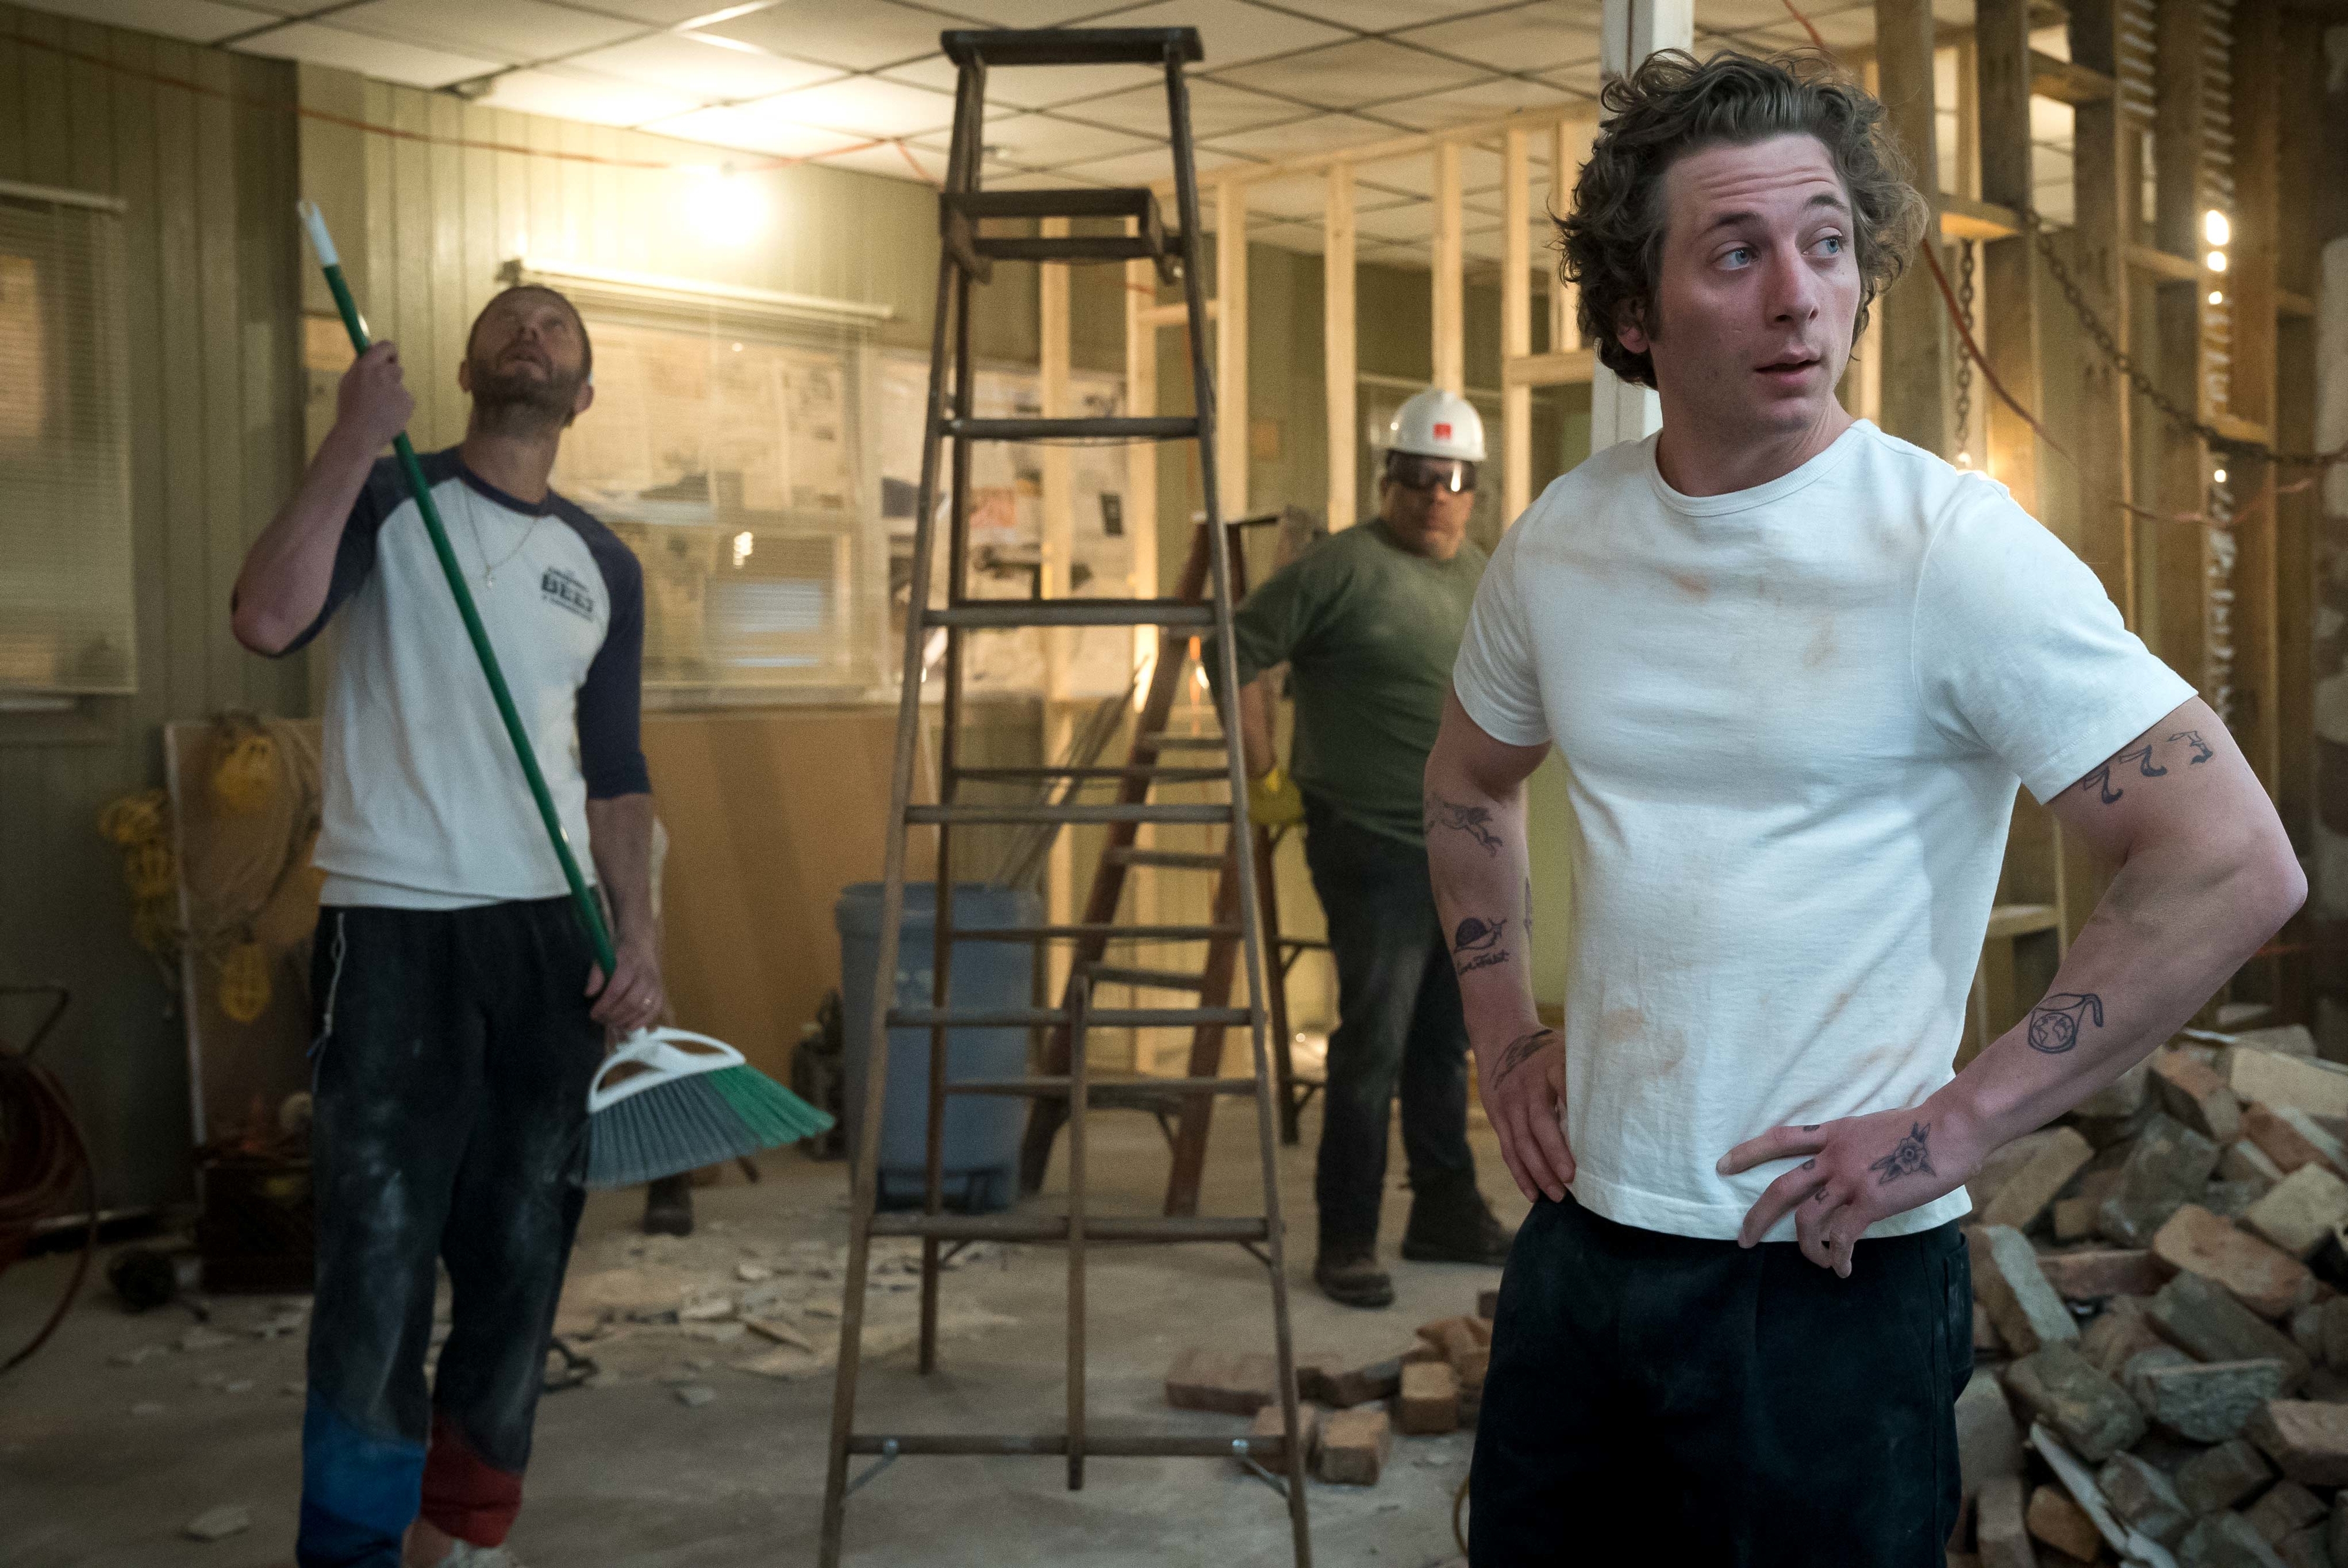 Jeremy Allen White in a construction demo scene in The Bear Season 2 with two guys in the background. Jeremy now has longer, shaggier hair